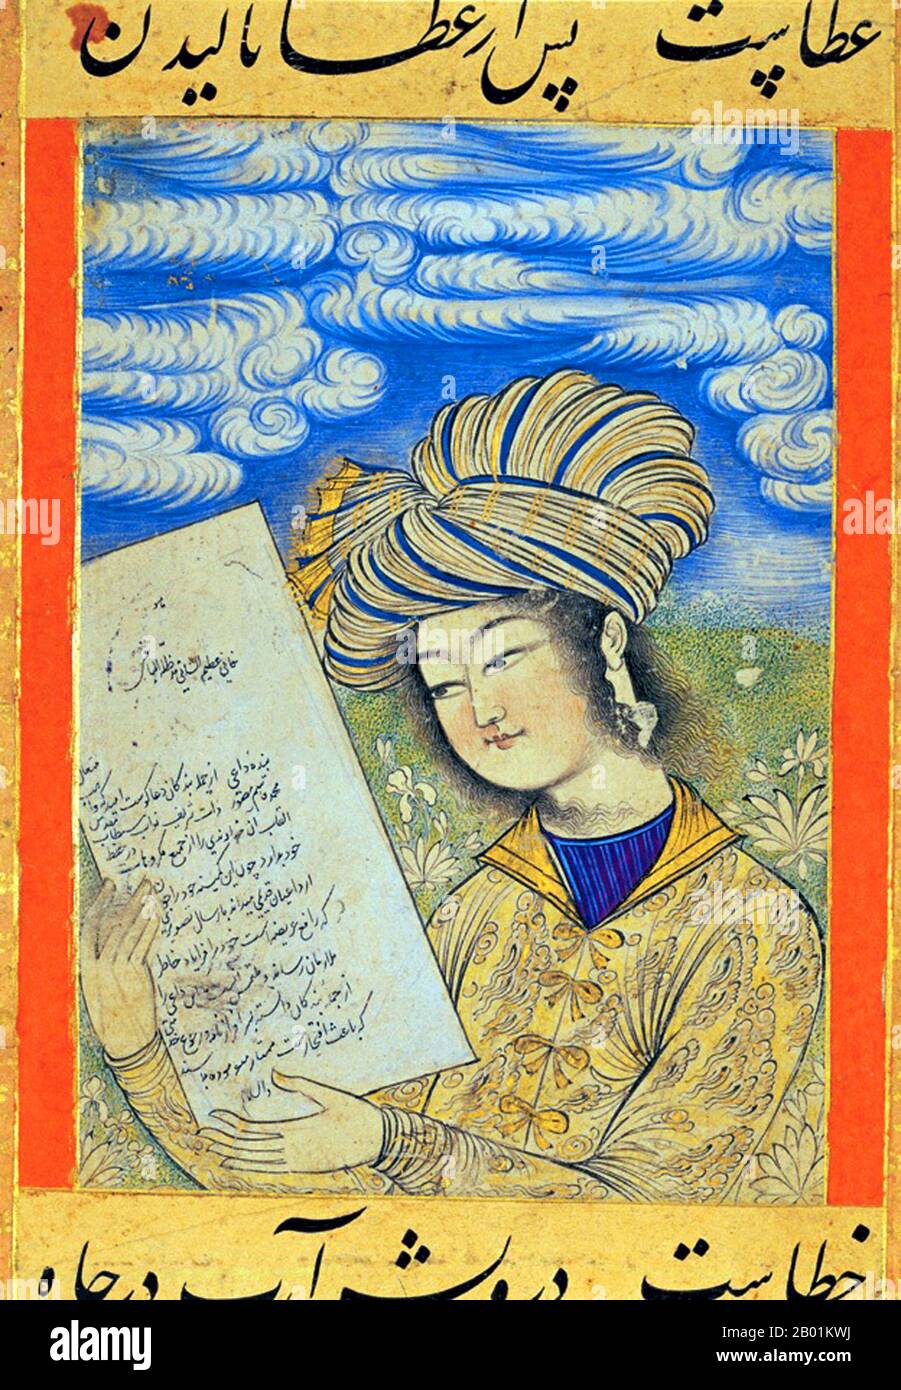 Iran/Persia: A young man reading a letter. Miniature painting by Muhammad Qasim (-1659), 1629.  A Persian miniature is a small painting on paper, whether a book illustration or a separate work of art intended to be kept in an album of such works called a muraqqa. The techniques are broadly comparable to the Western and Byzantine traditions of miniatures in illuminated manuscripts. Although there is an equally well-established Persian tradition of wall-painting, the survival rate and state of preservation of miniatures is better, and miniatures are the best-known form of Persian painting. Stock Photo